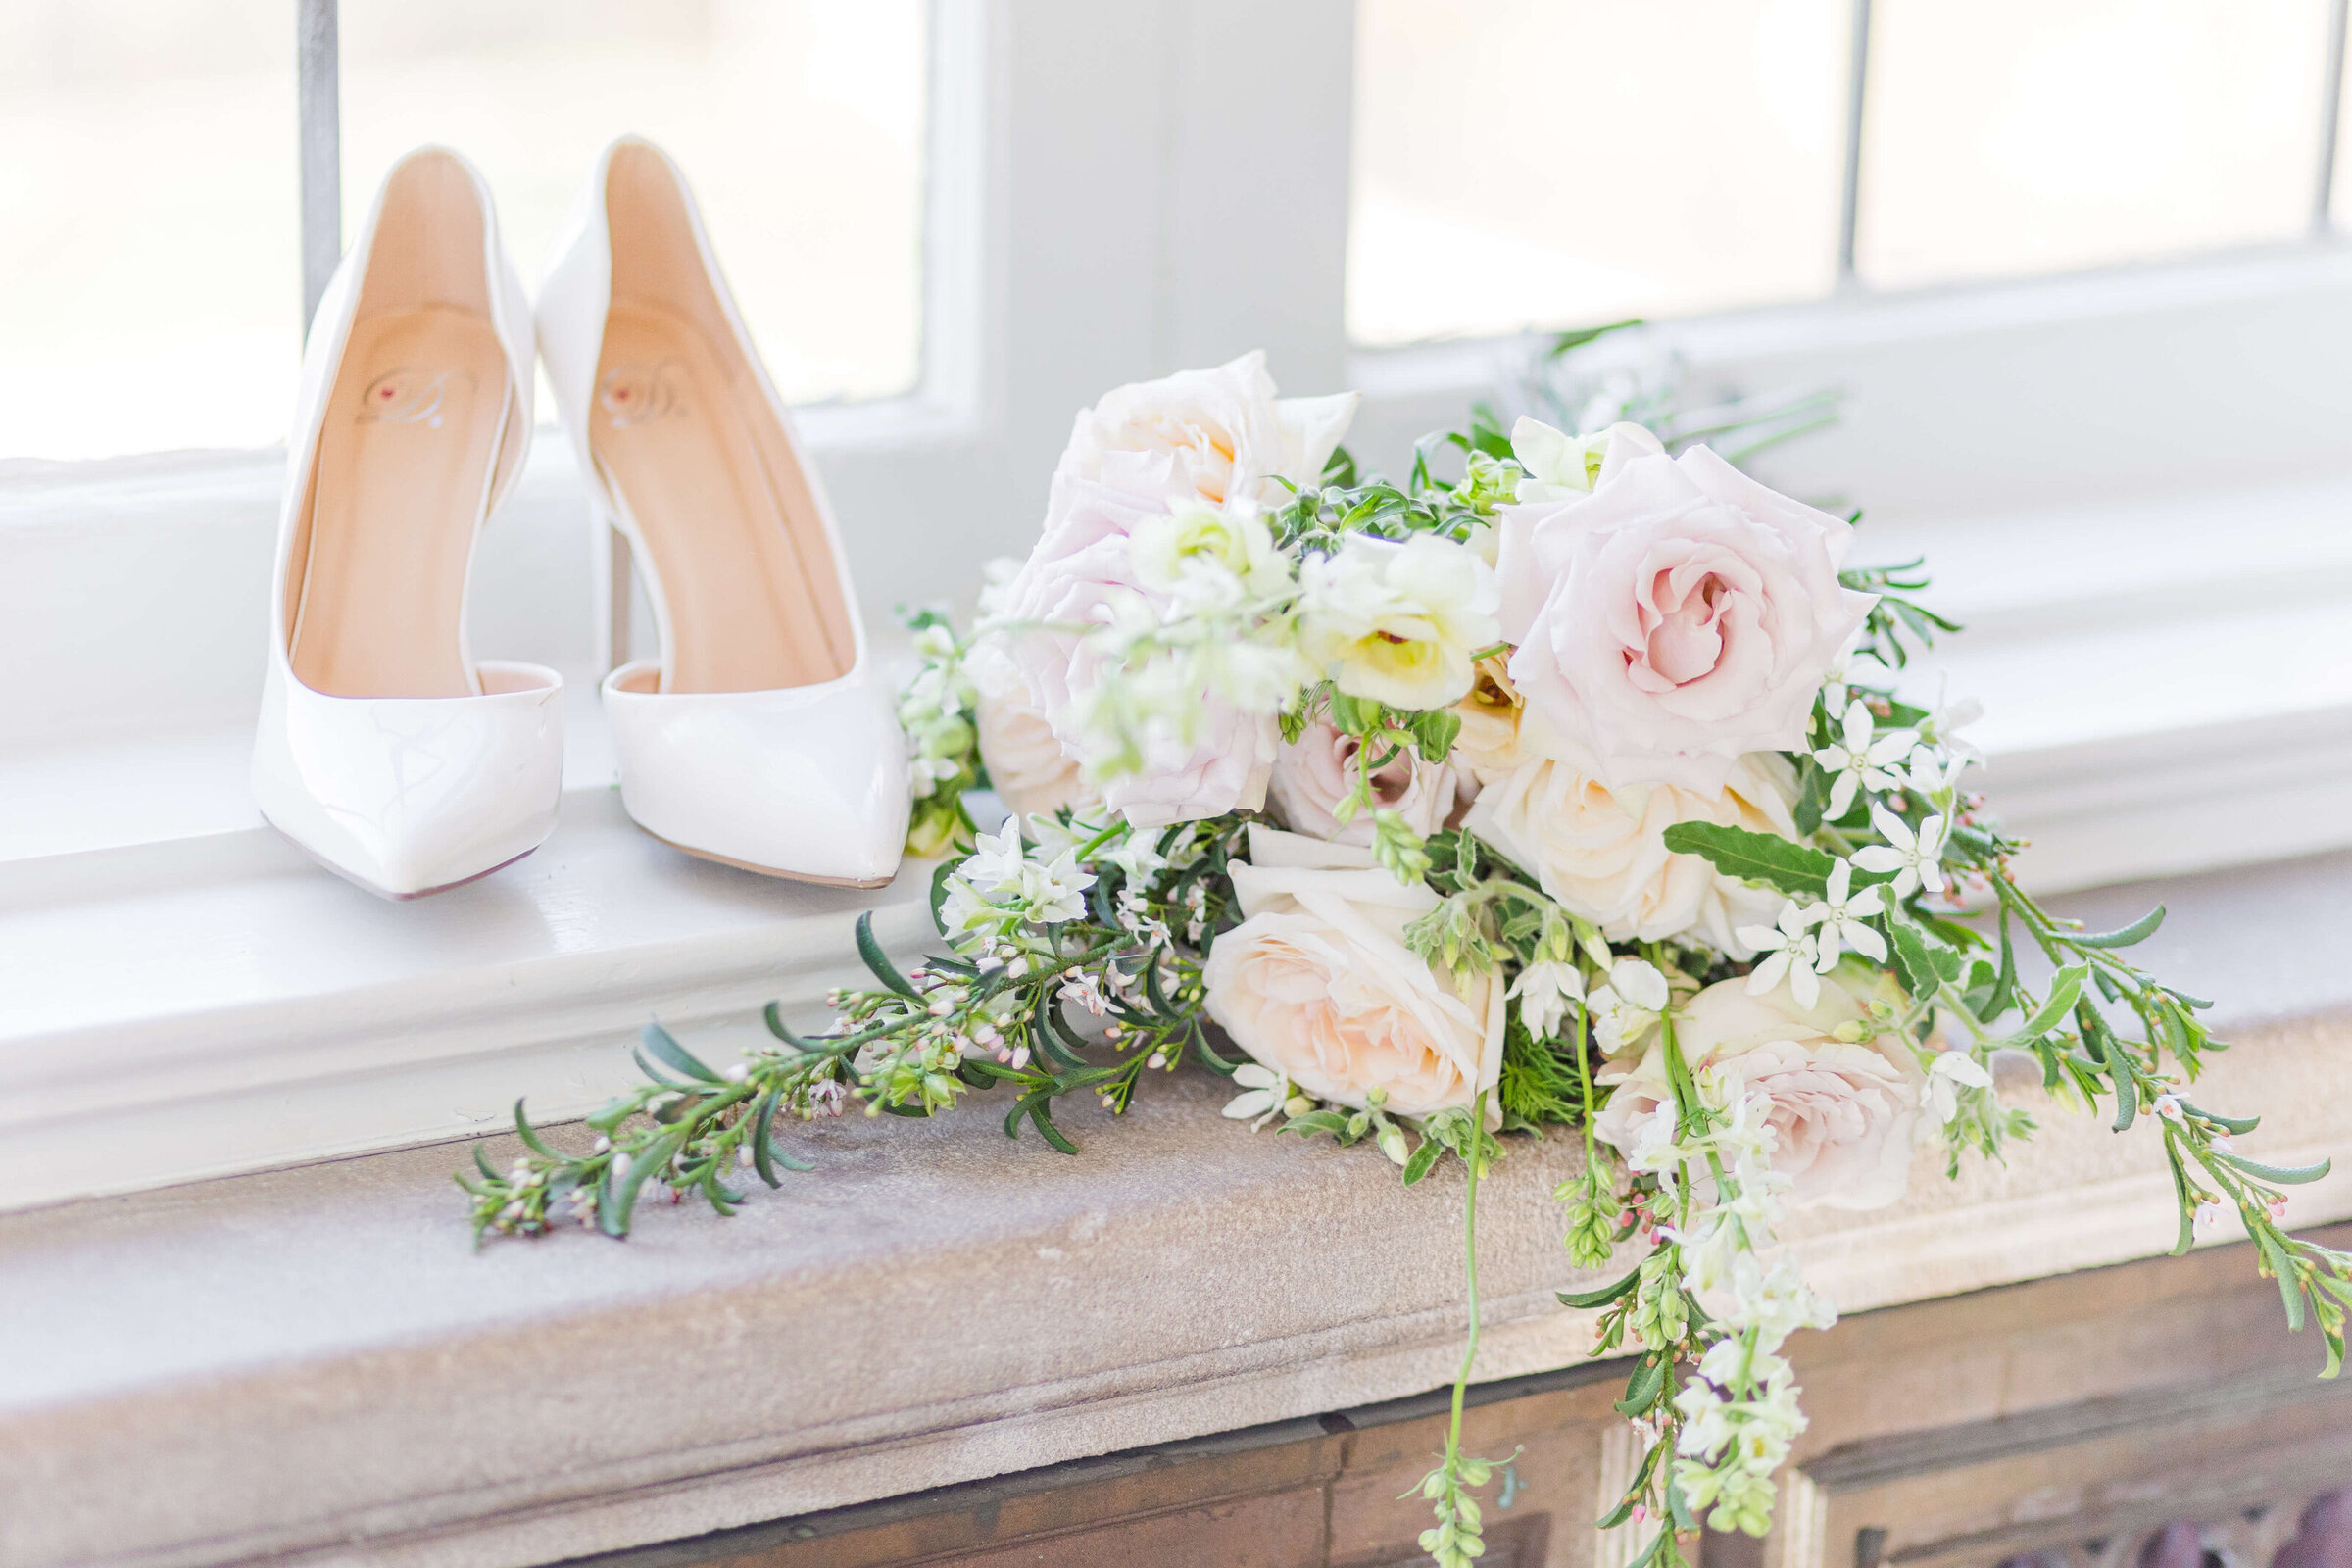 A photograph of white wedding heals and a wedding bouquet with white flowers and greenery.